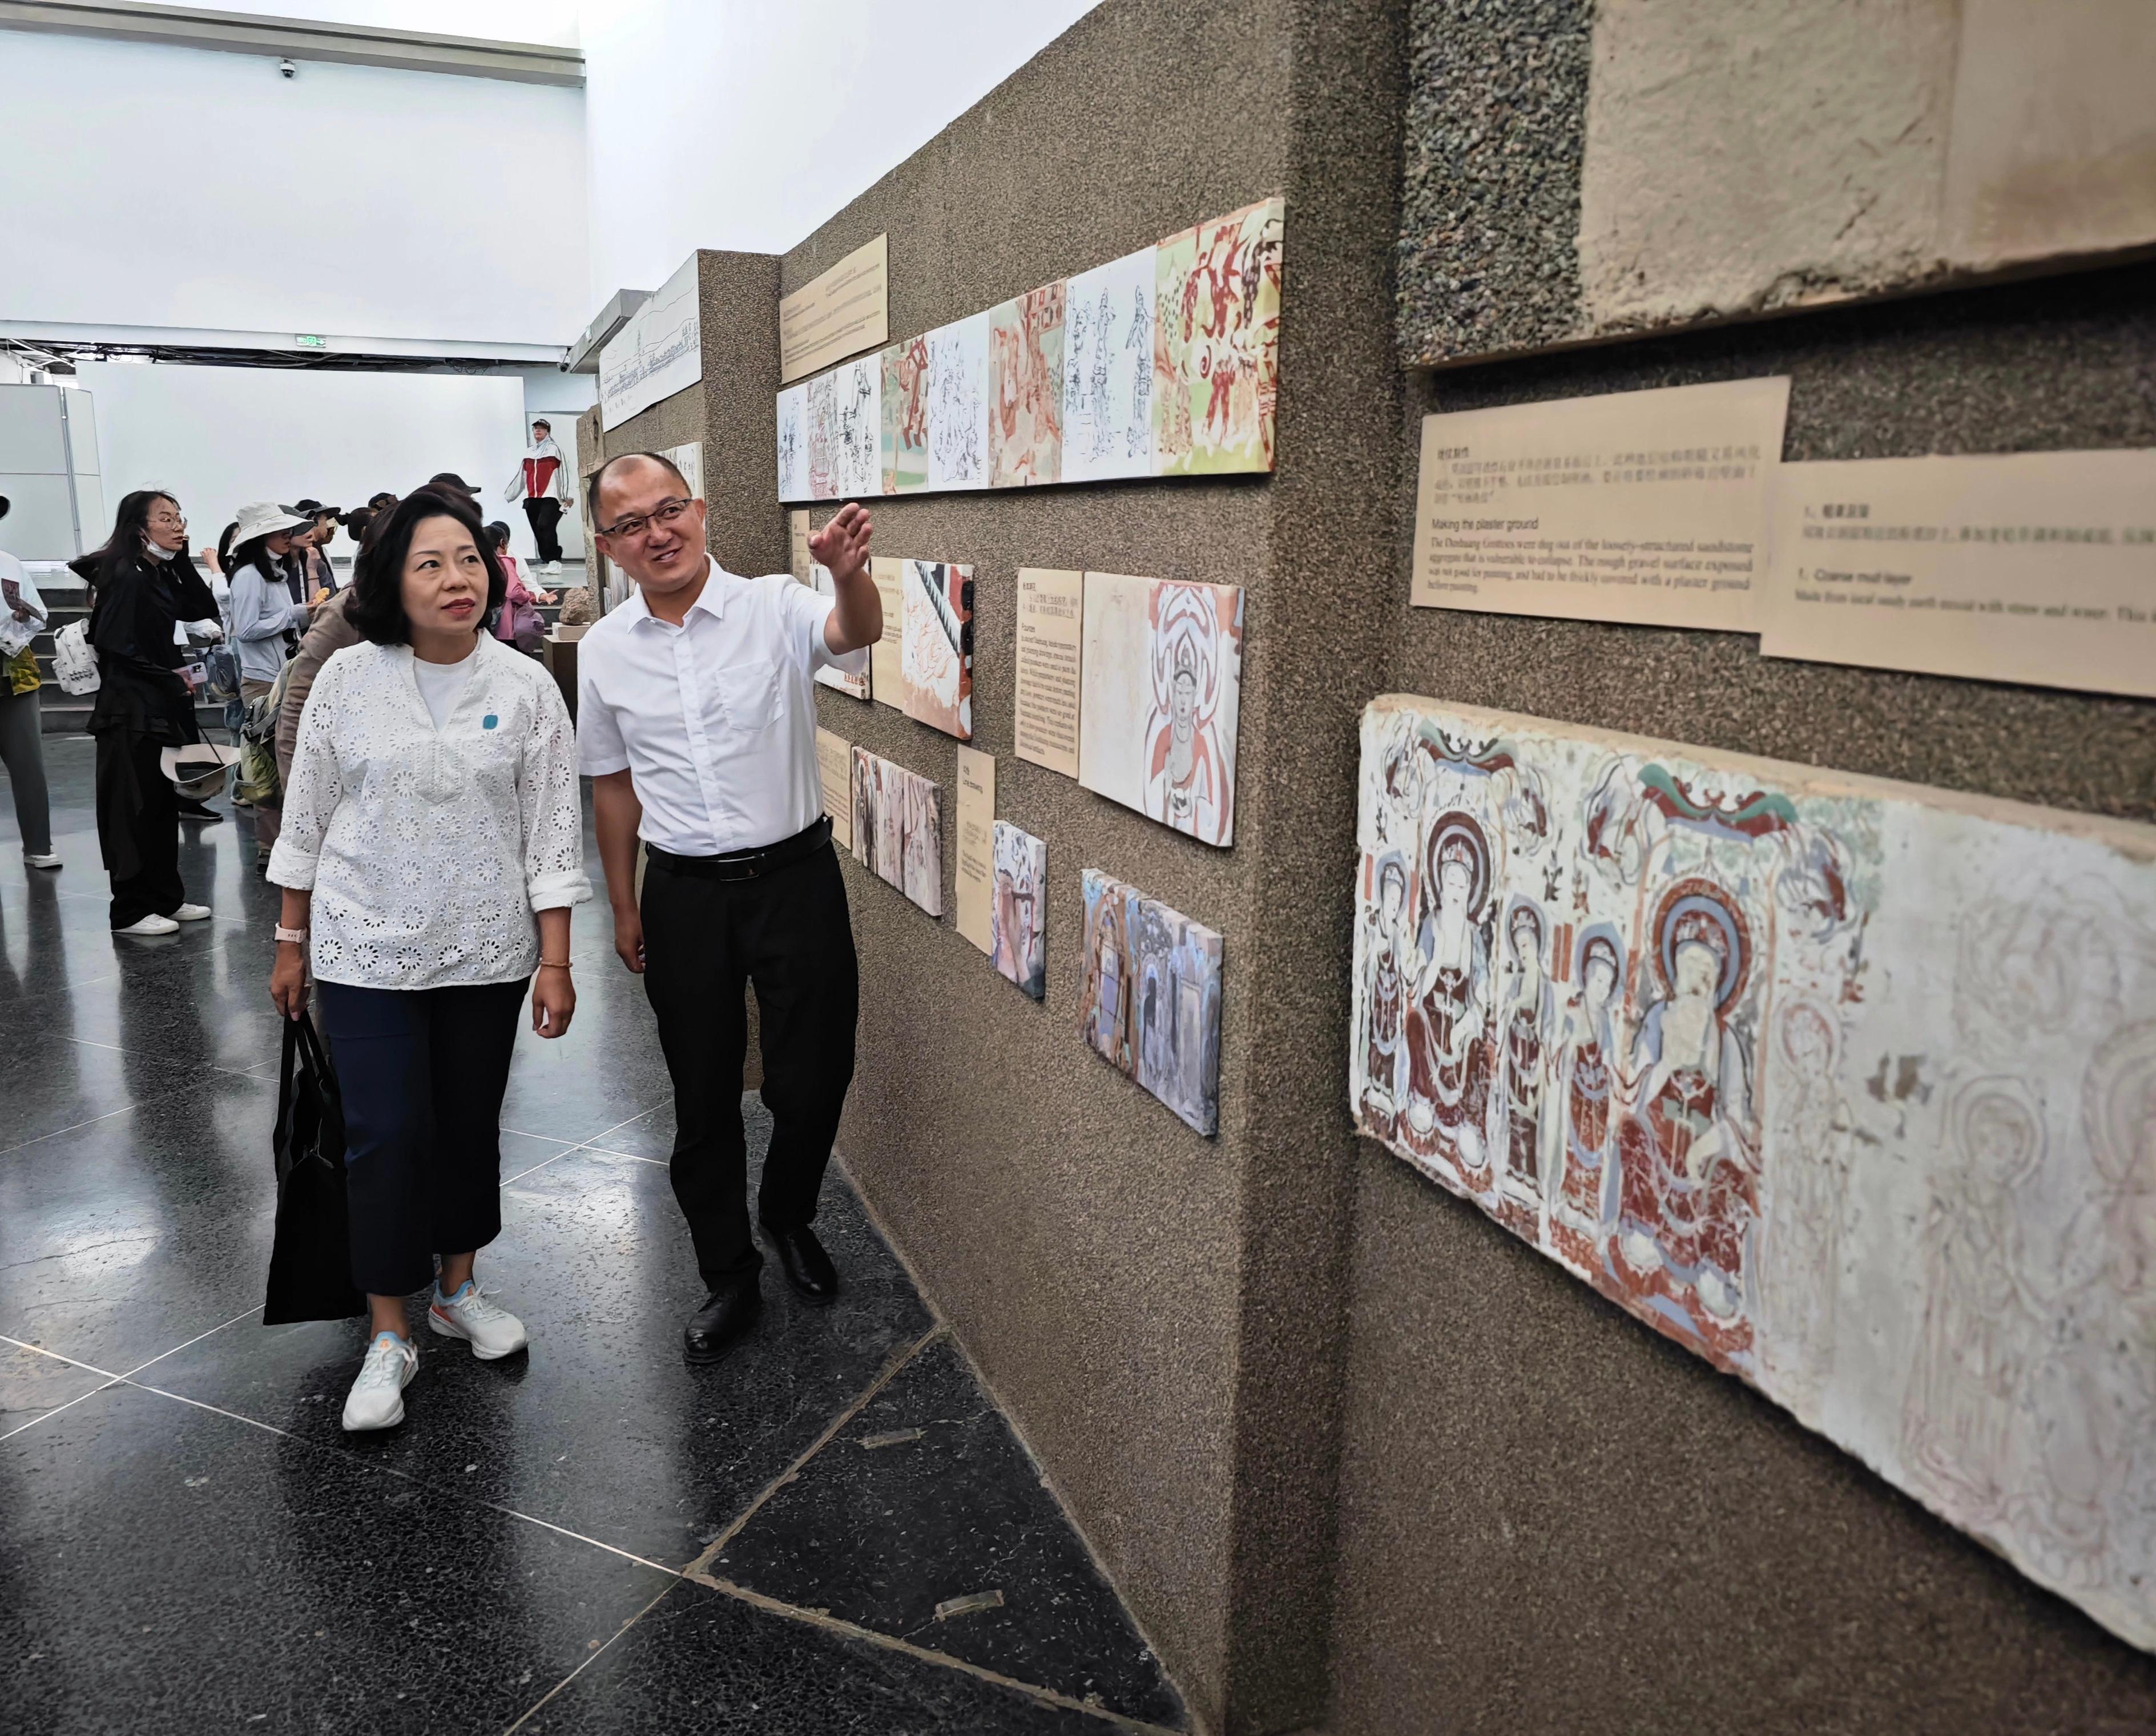 Accompanied by the Director of the Gansu Hongwen Dunhuang Art Research and Training Center of the Dunhuang Academy, Mr Bian Lei (right), the Secretary for Home and Youth Affairs, Miss Alice Mak (left), visited the Dunhuang grottoes cultural relics conservation research and exhibition centre yesterday (June 4). 